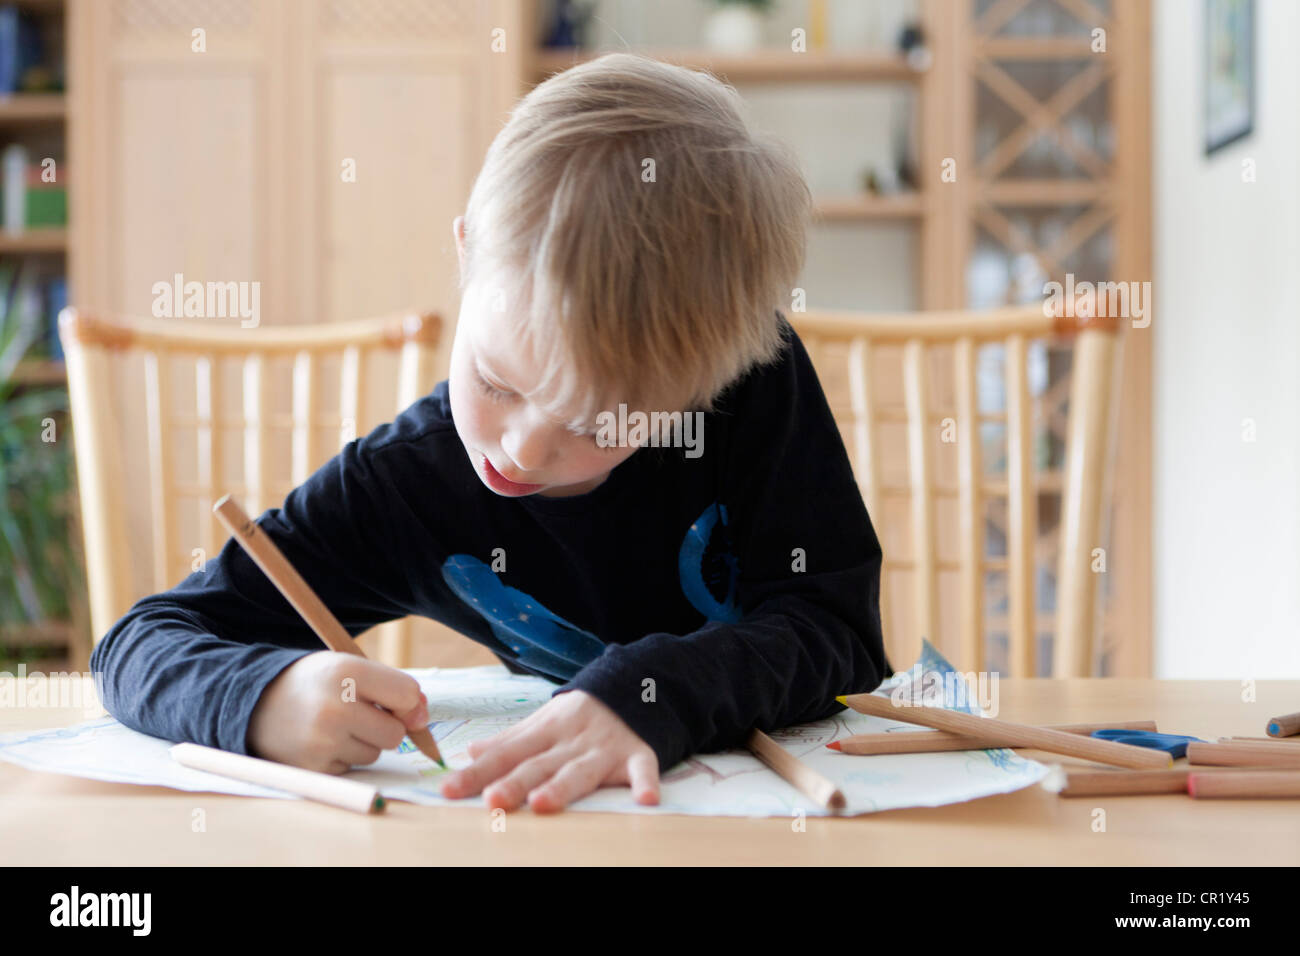 Boy drawing with colored pencils Stock Photo